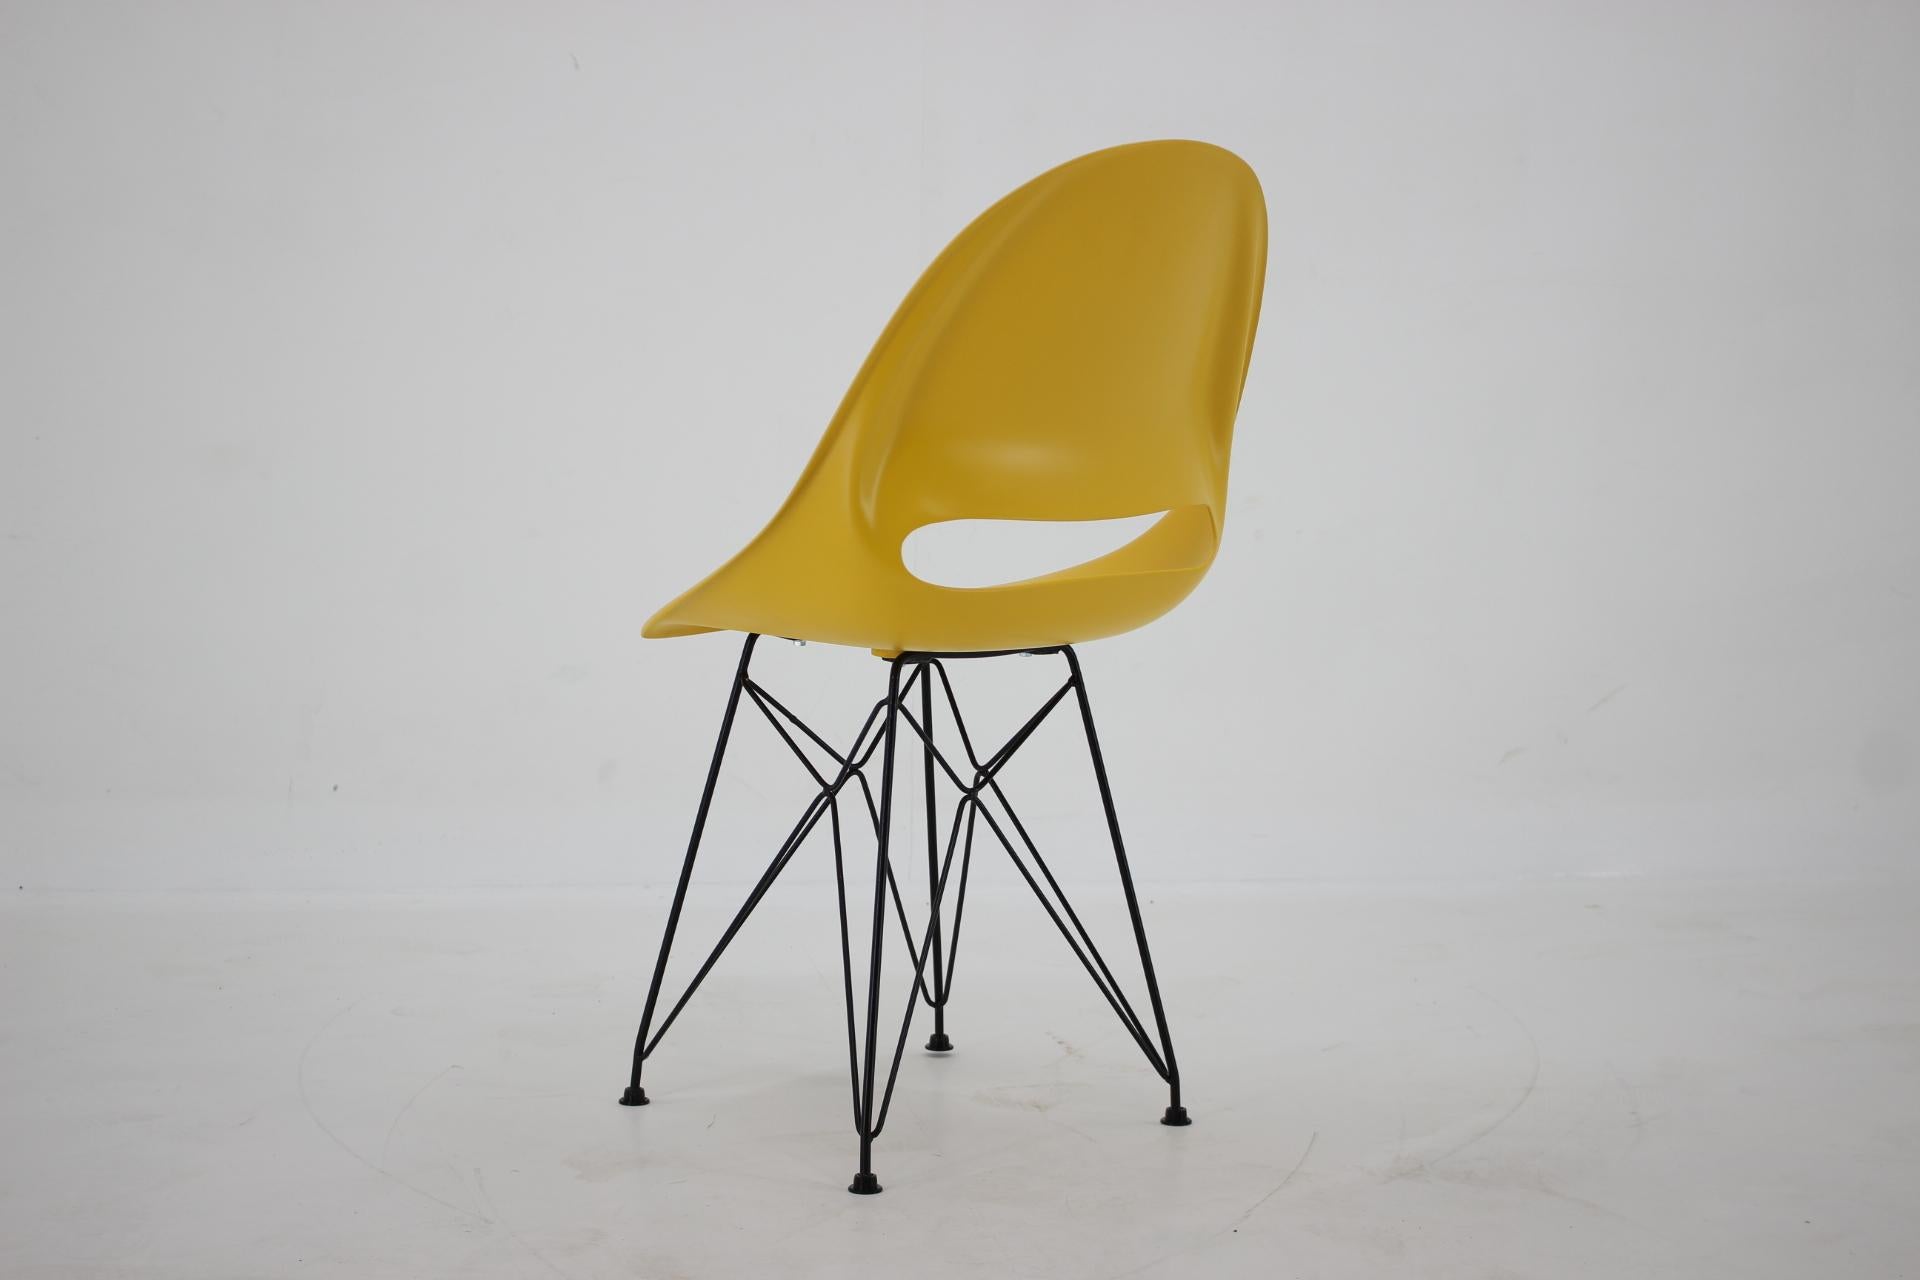 Set of 4 Midcentury Yellow Design Fiberglass Dining Chairs by M.Navratil, 1960s For Sale 4